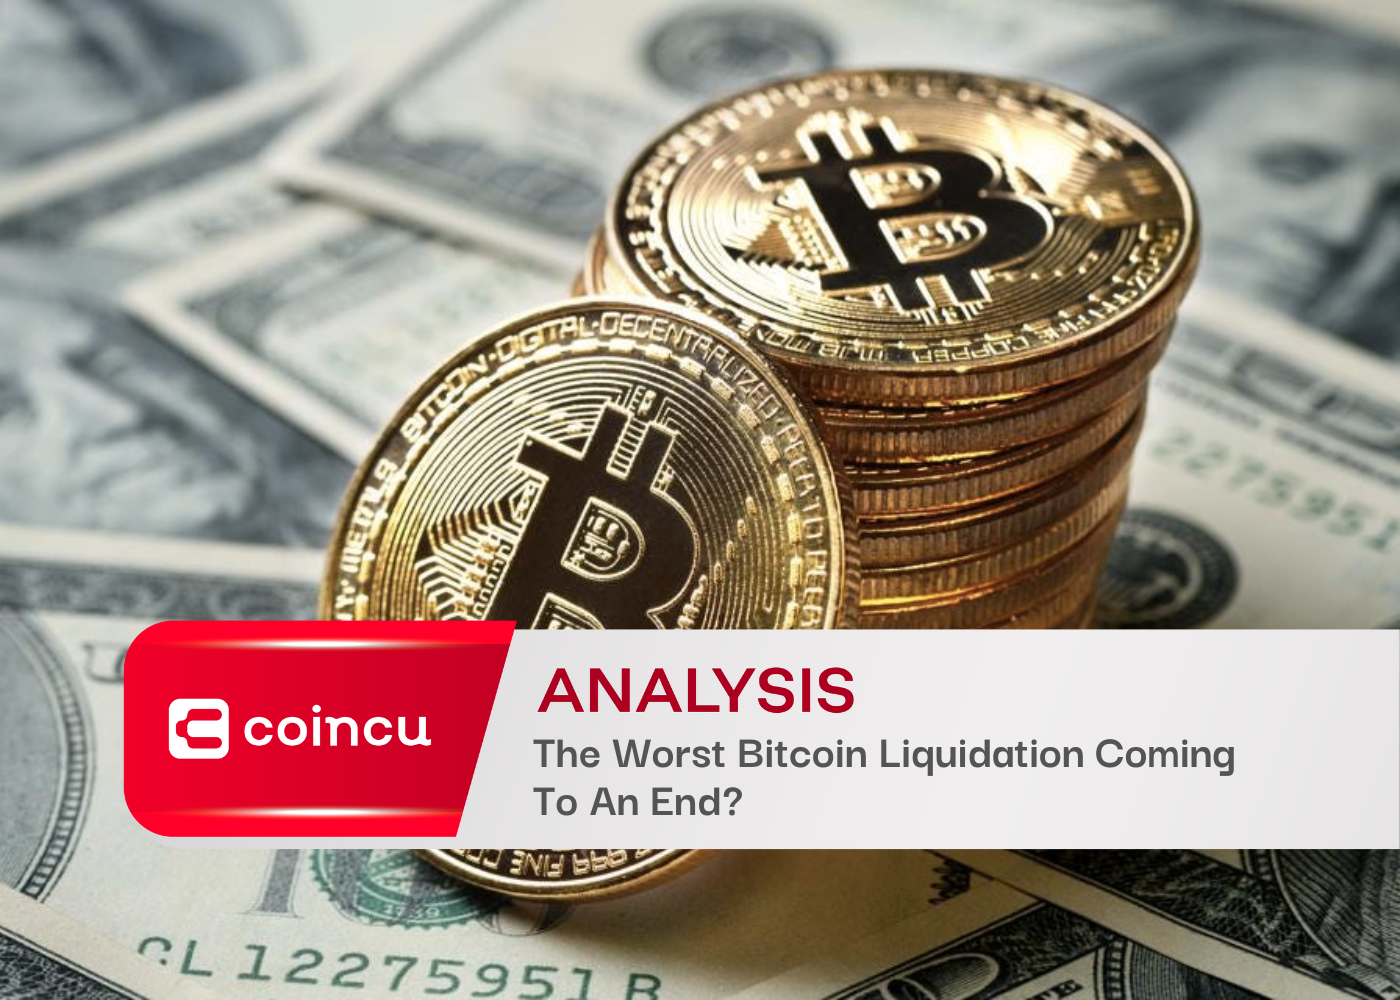 The Worst Bitcoin Liquidation Coming To An End?